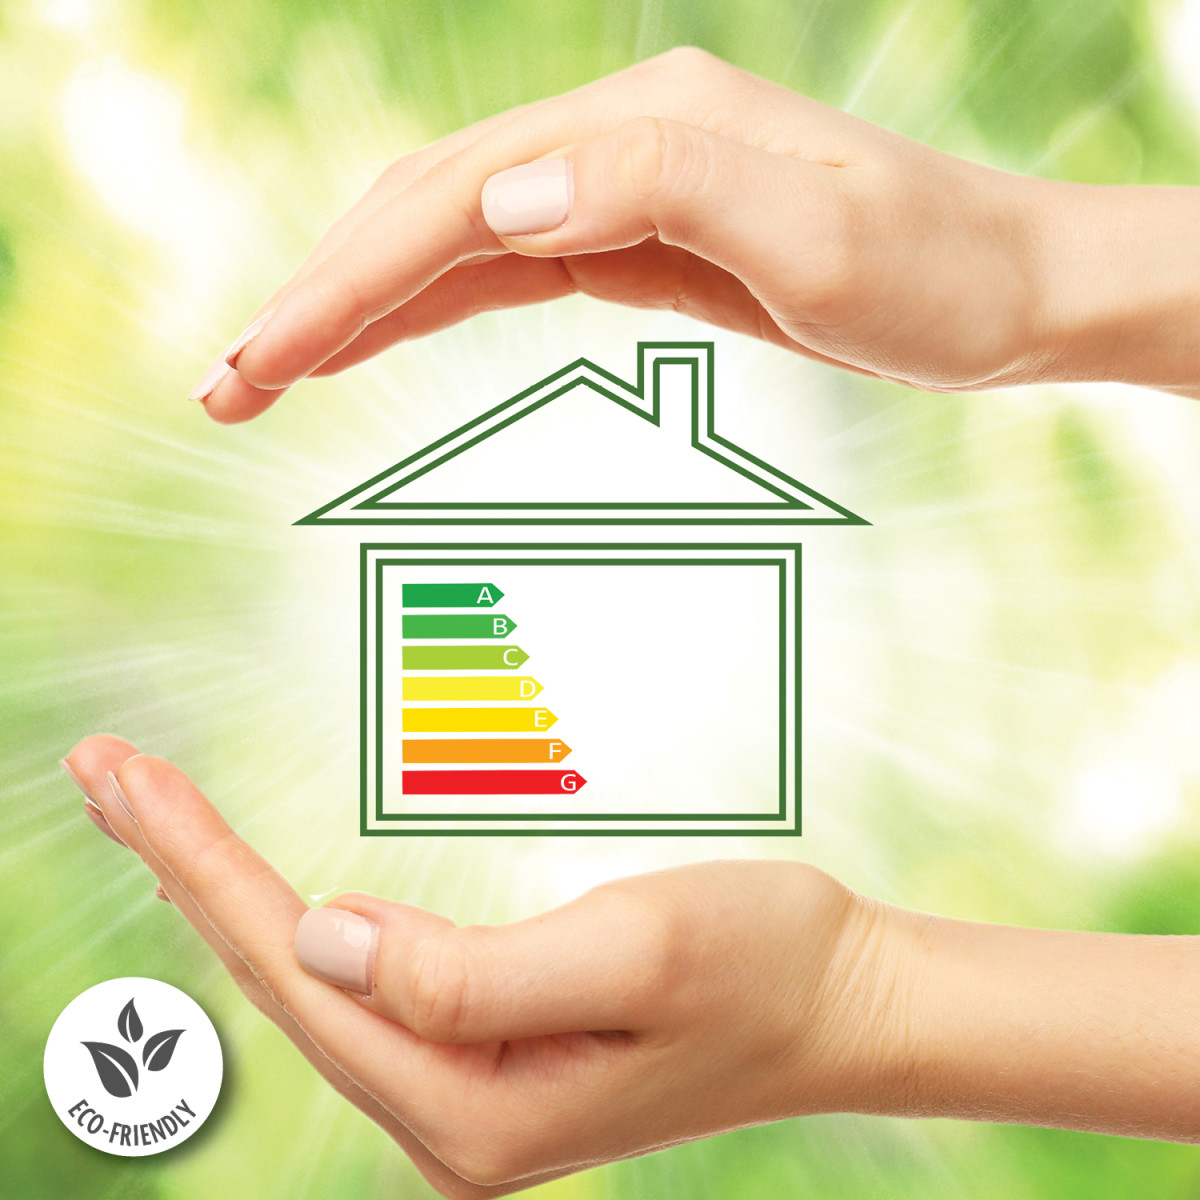 7 Tips for Building an Energy-Efficient Home